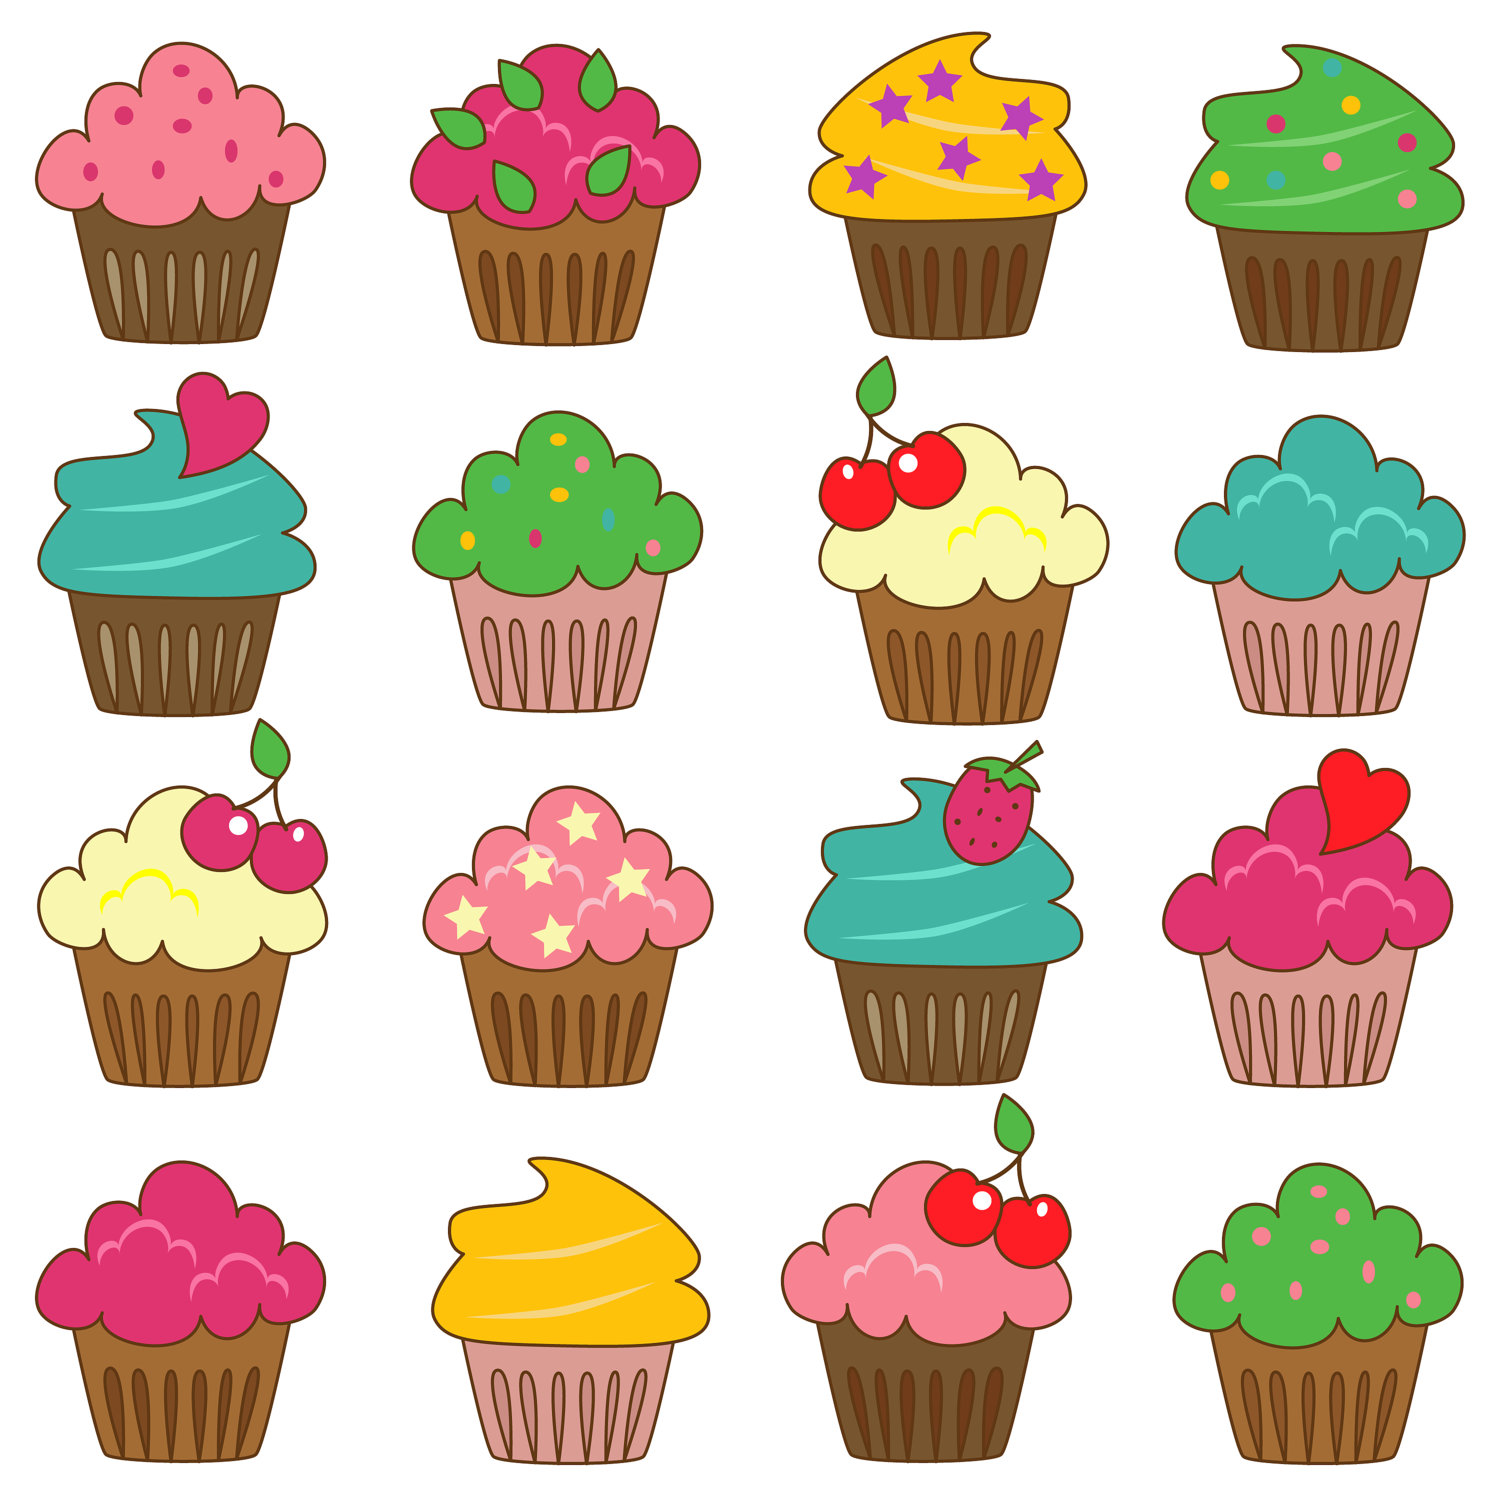 Cup Cake Clipart - ClipArt Best